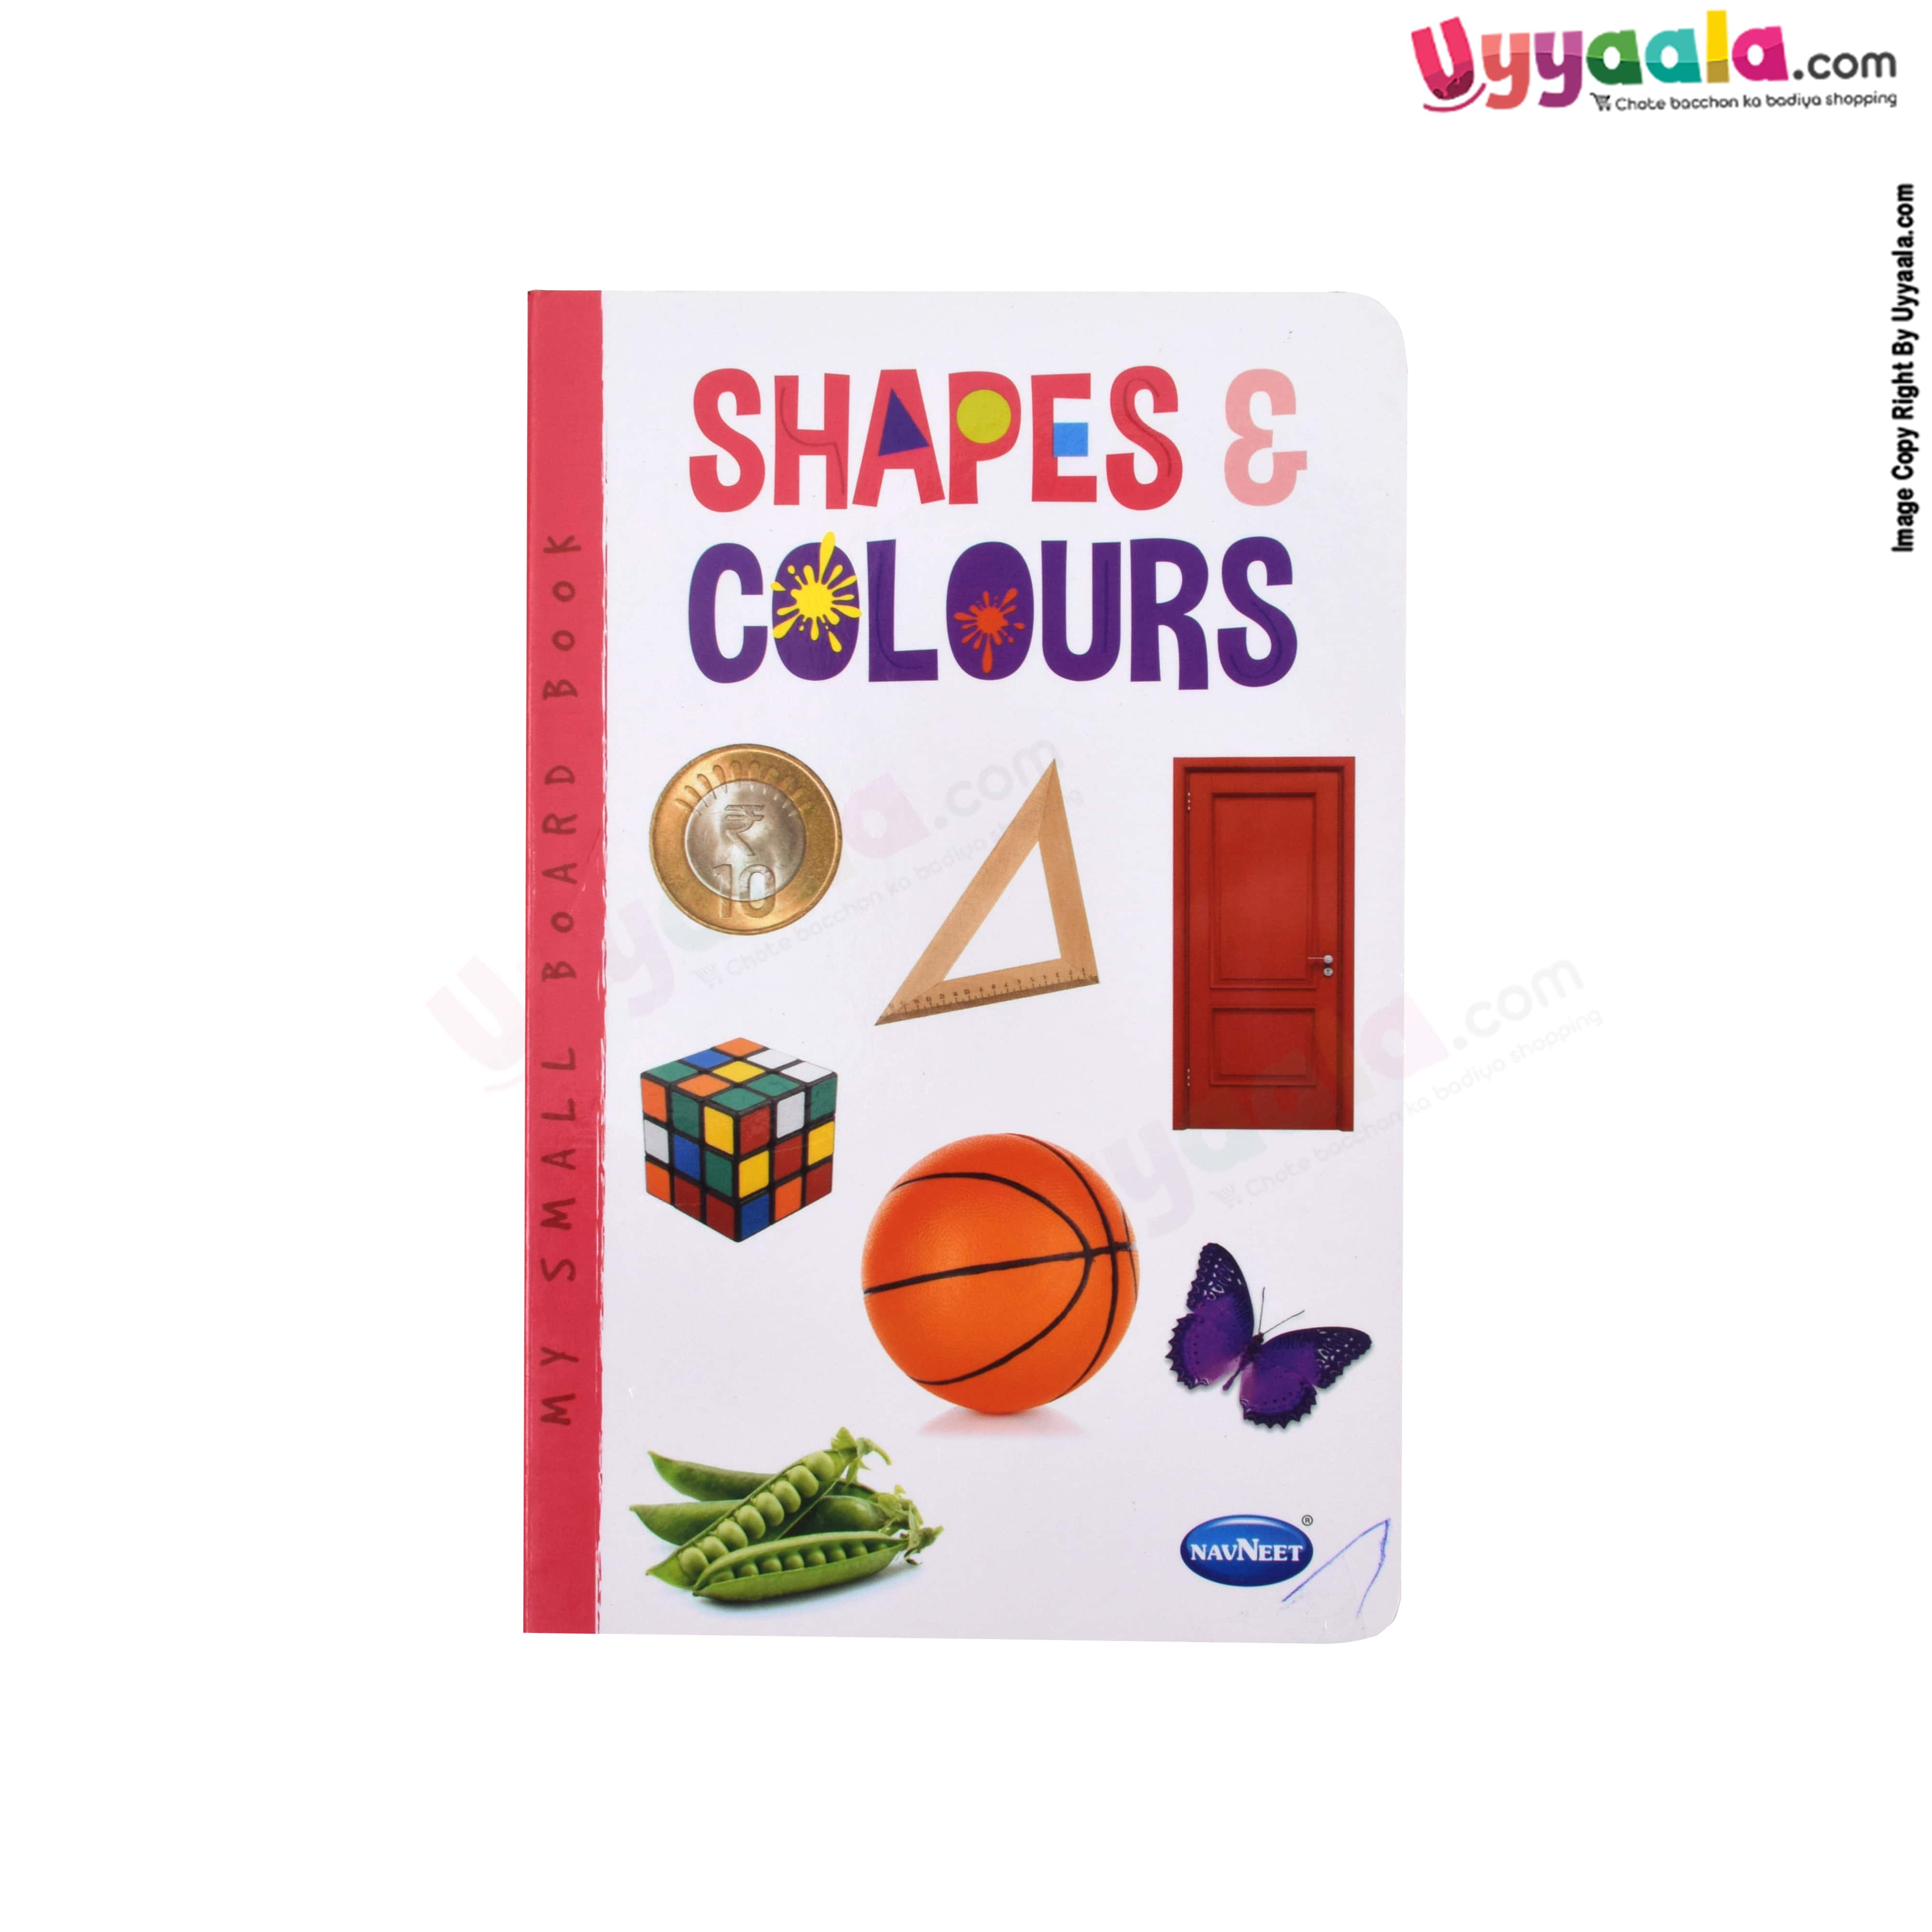 NAVNEET my small board book - shapes & colors